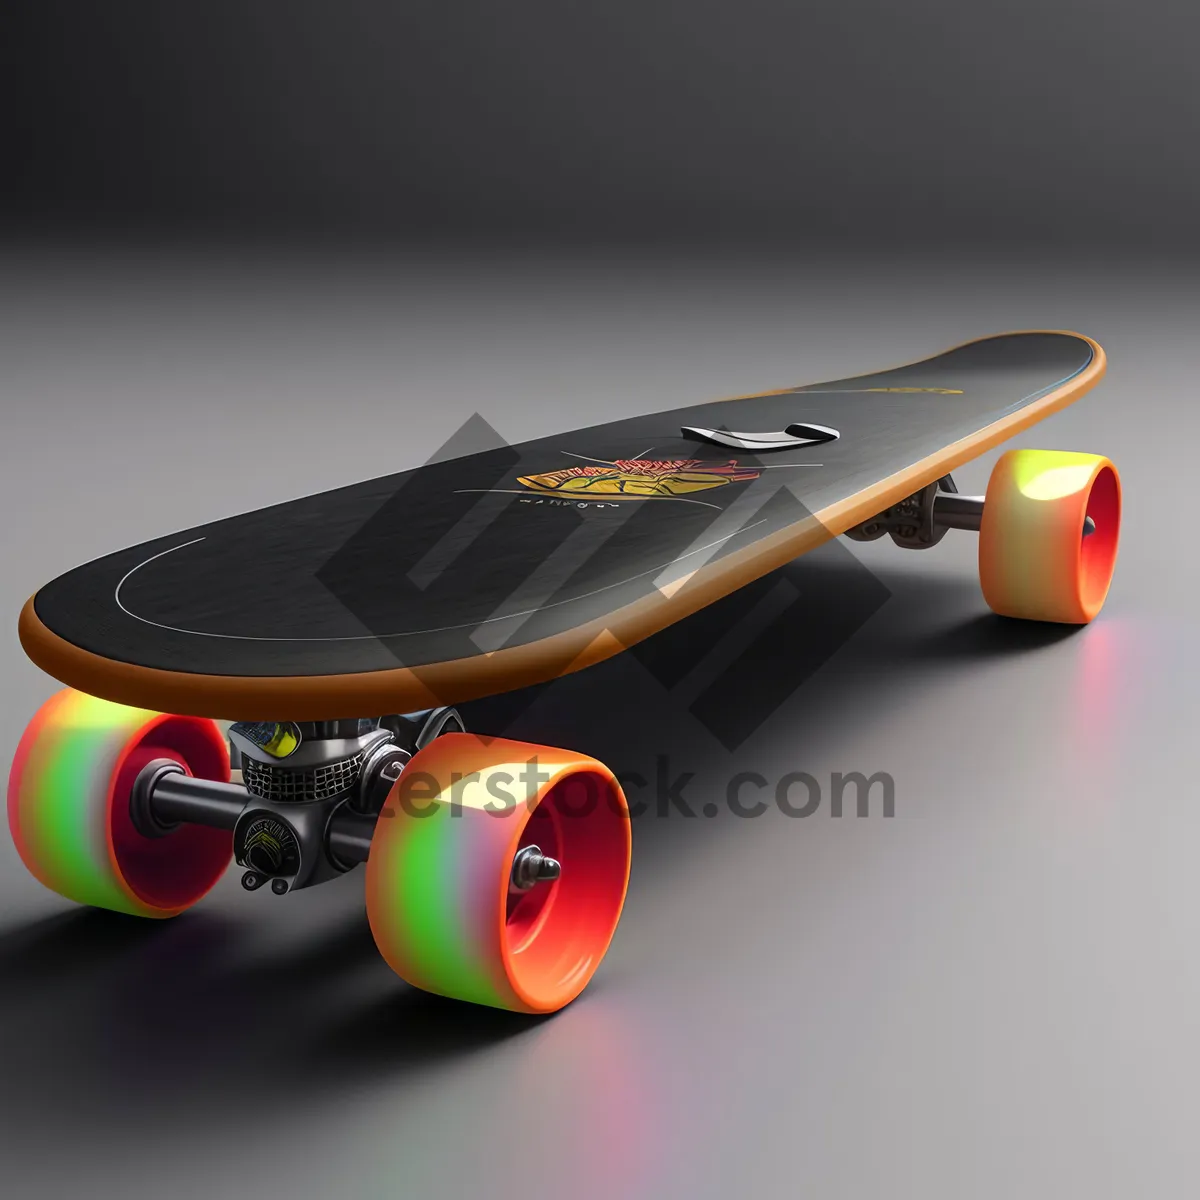 Picture of Skateboard Air Transportation: Jet-powered Board